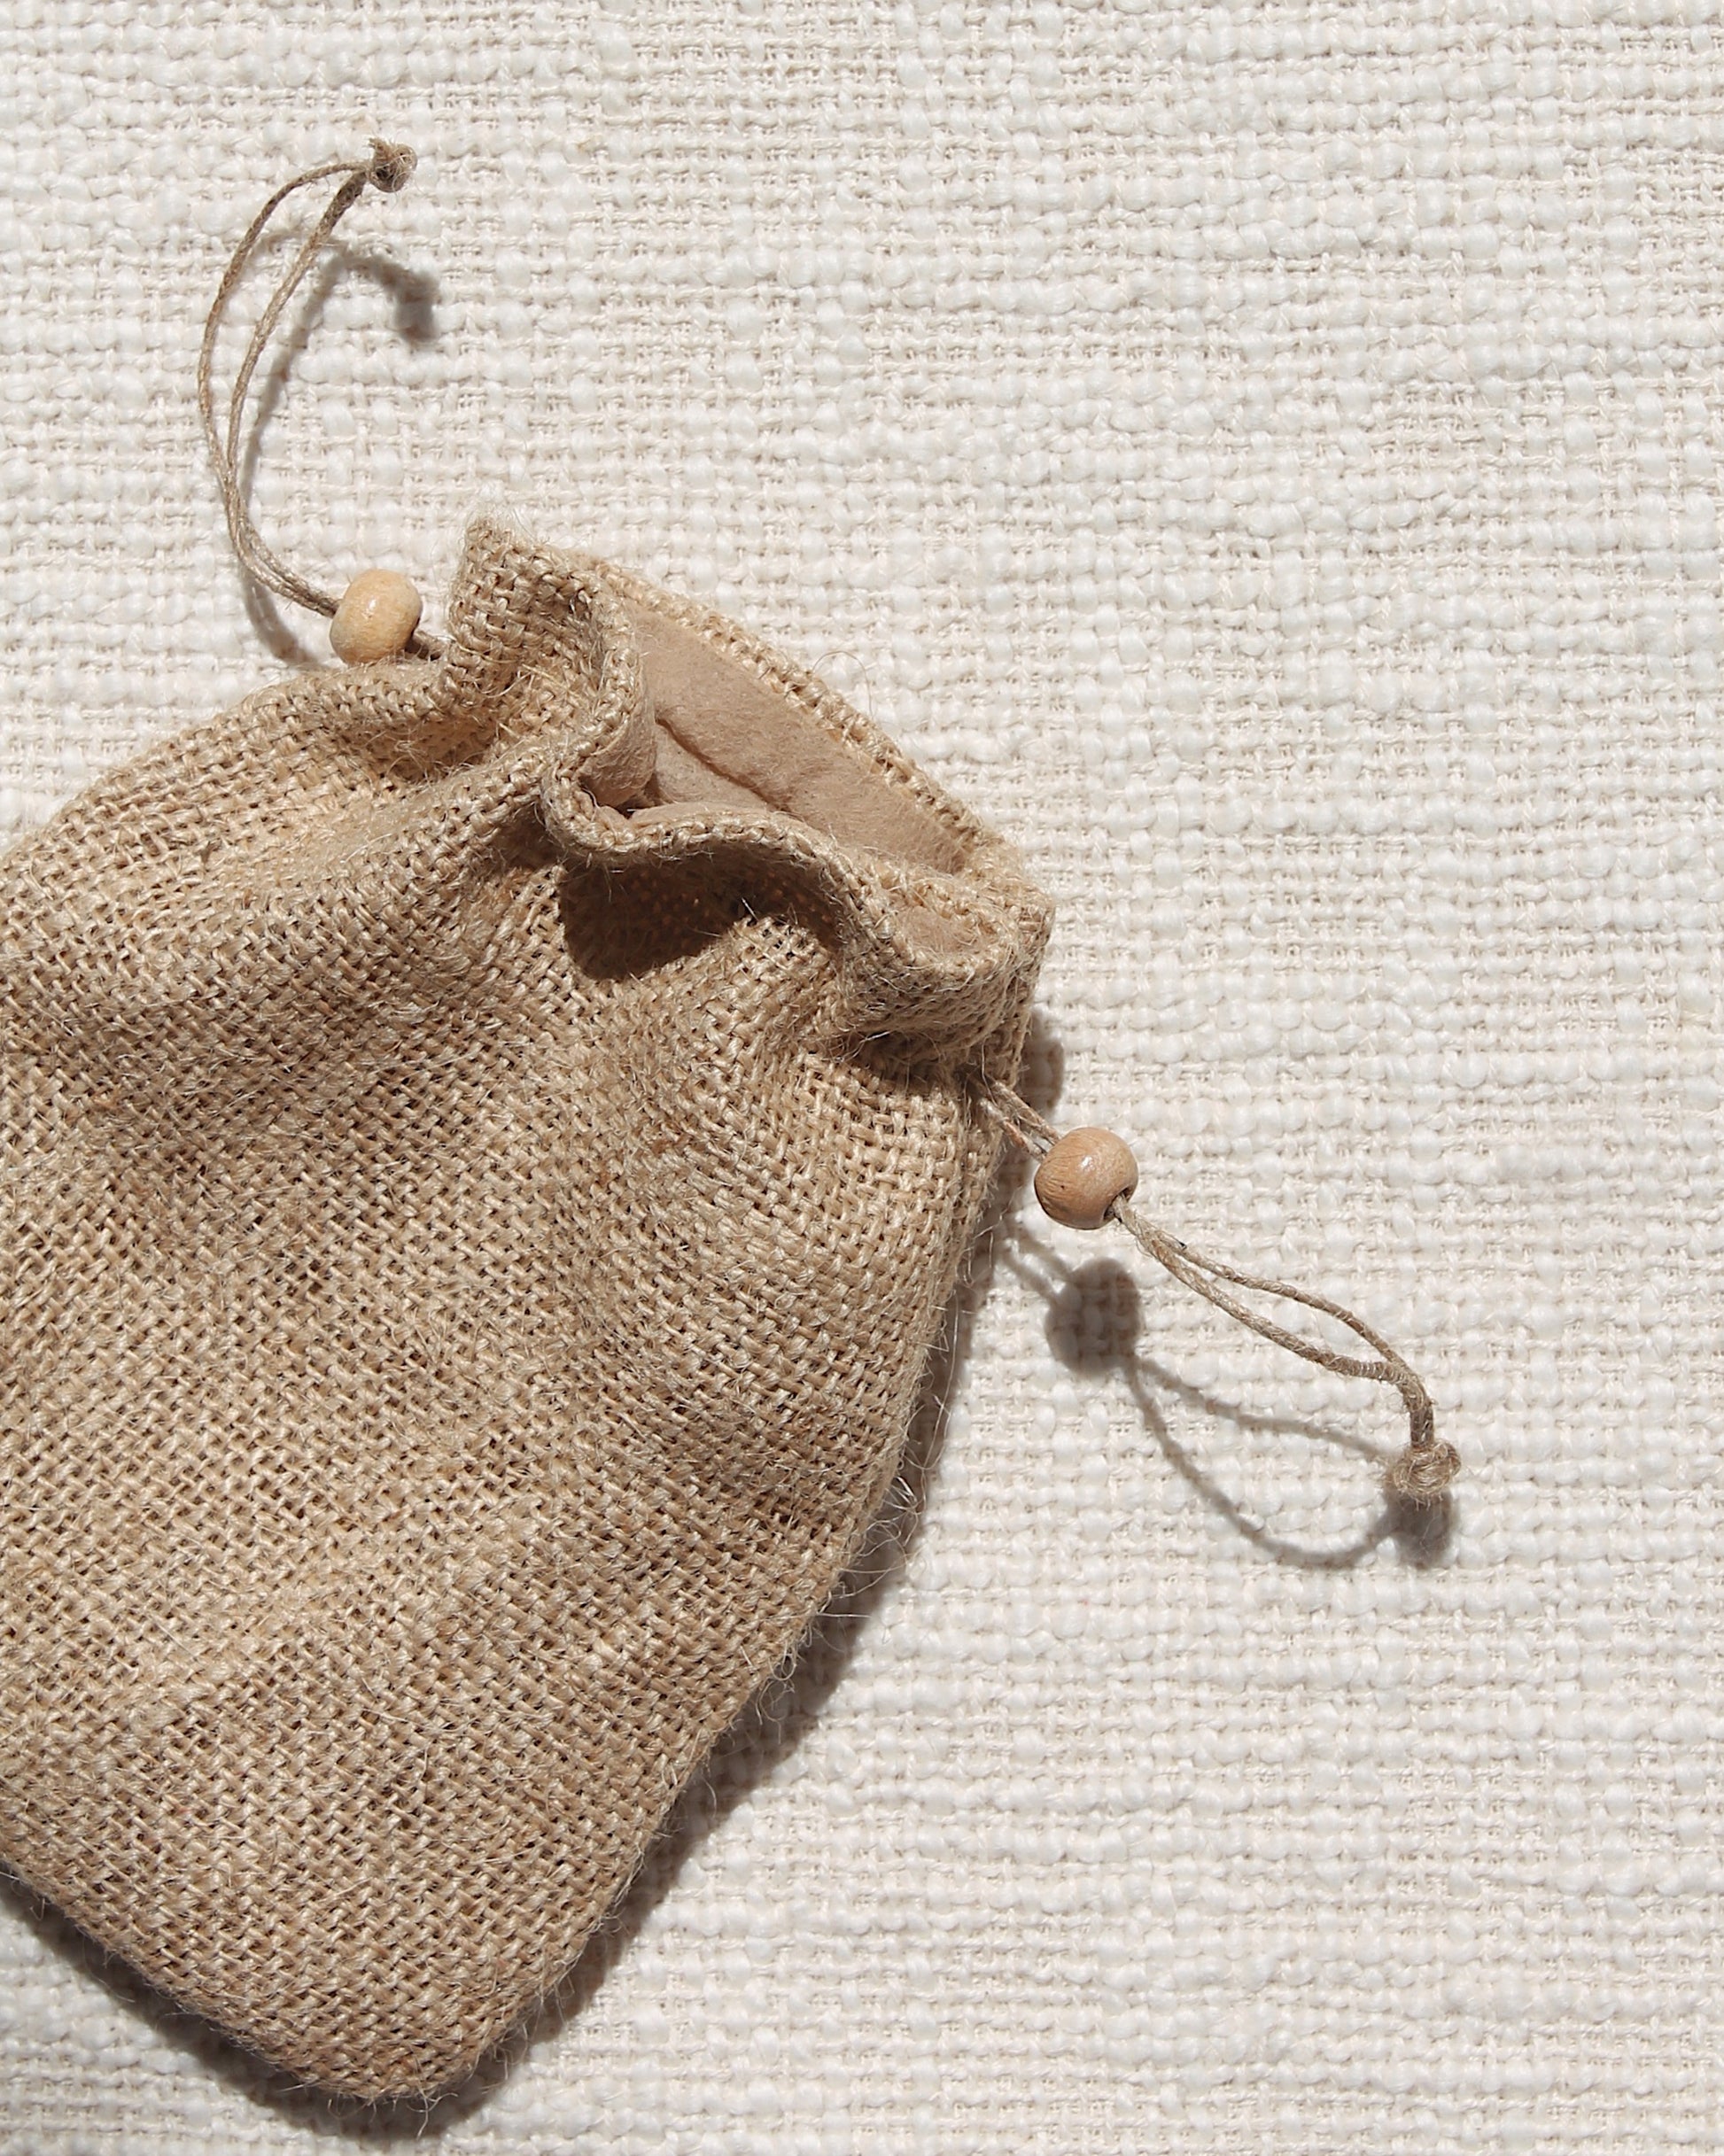 Natural Jute bag with wooden beads on the strings